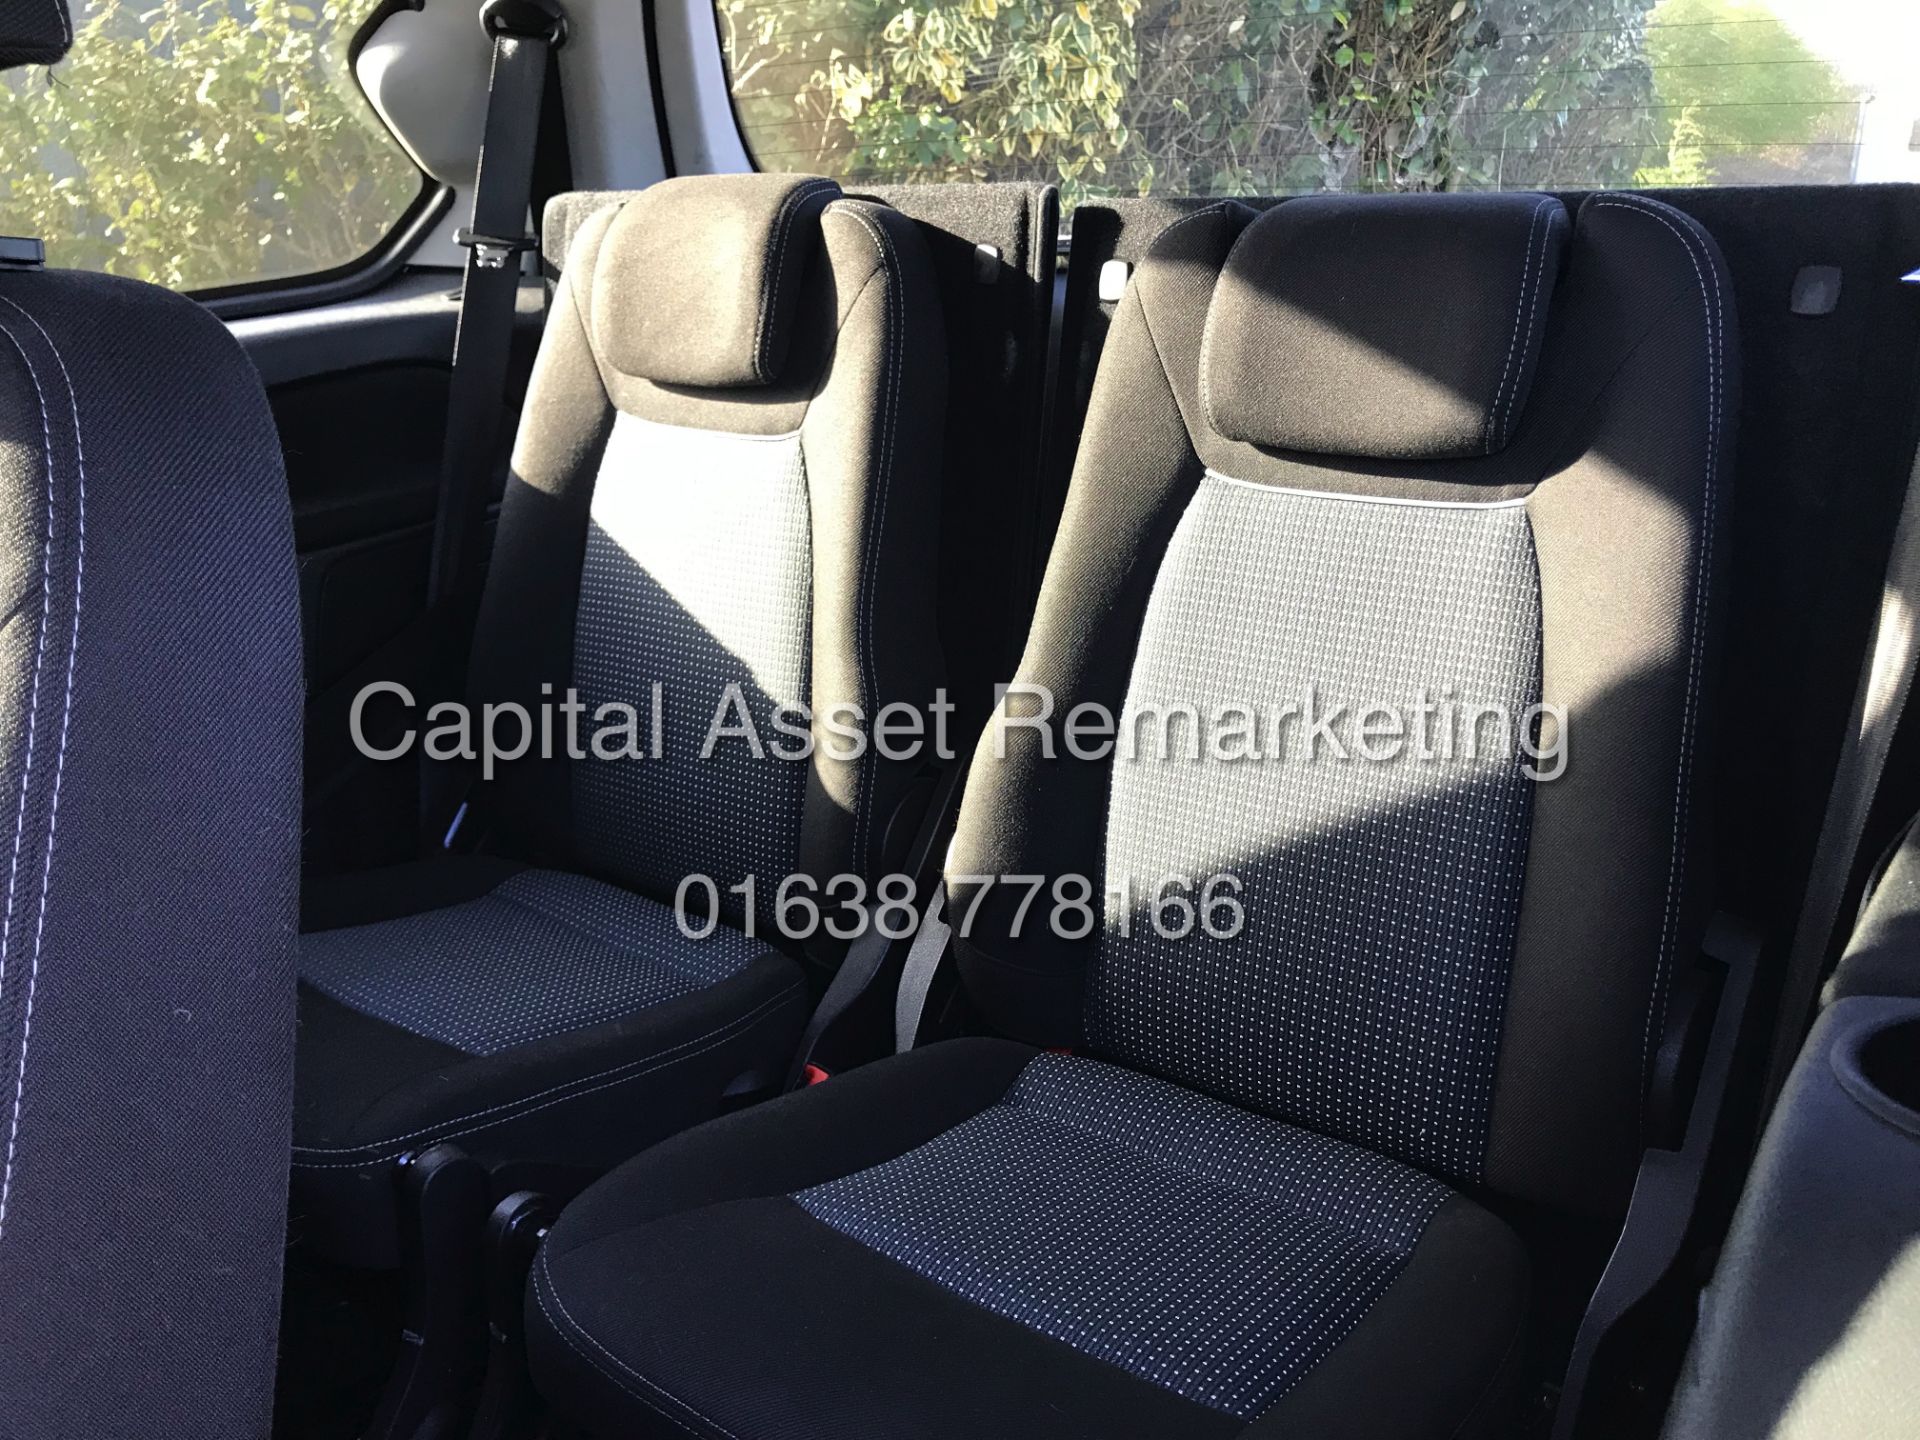 On Sale FORD GALAXY 2.0TDCI "ZETEC - POWERSHIFT" 7 SEATER (15 REG) AIR CON - 1 OWNER - 140BHP ENGINE - Image 12 of 17